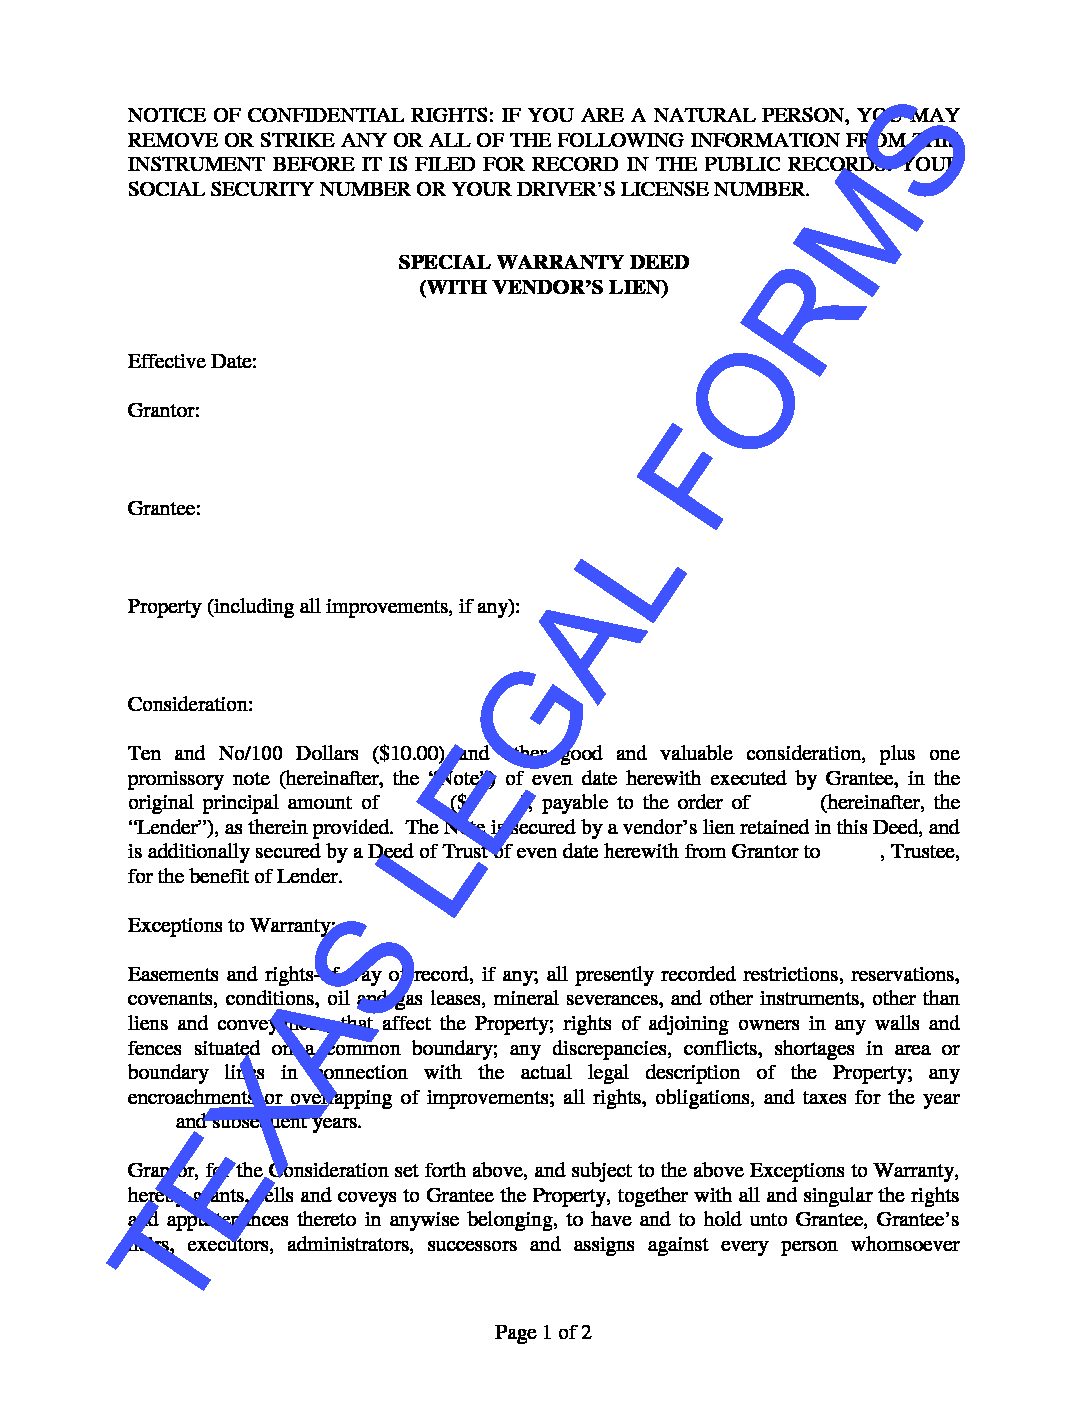 texas-special-warranty-deed-with-vendor-s-lien-form-download-real